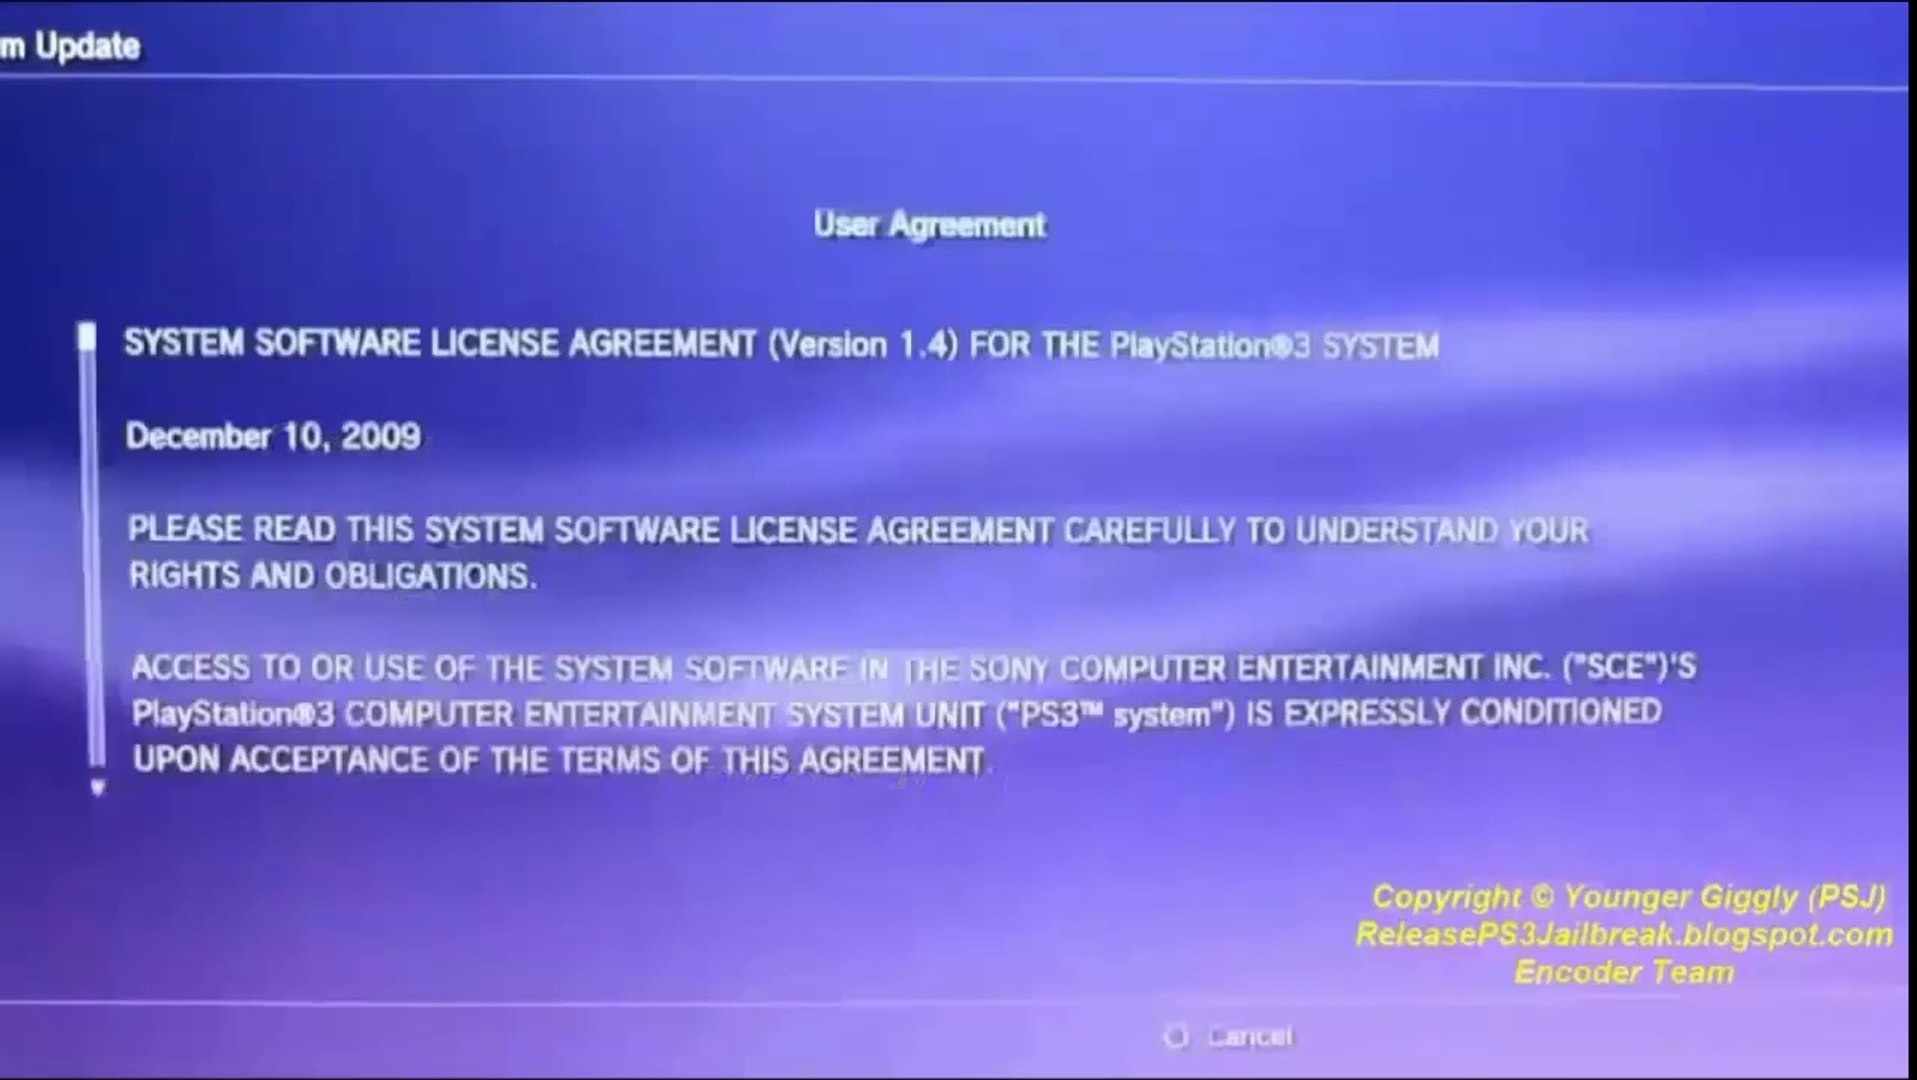 PS3 Jailbreak  How to Install CFW using the safest and easiest